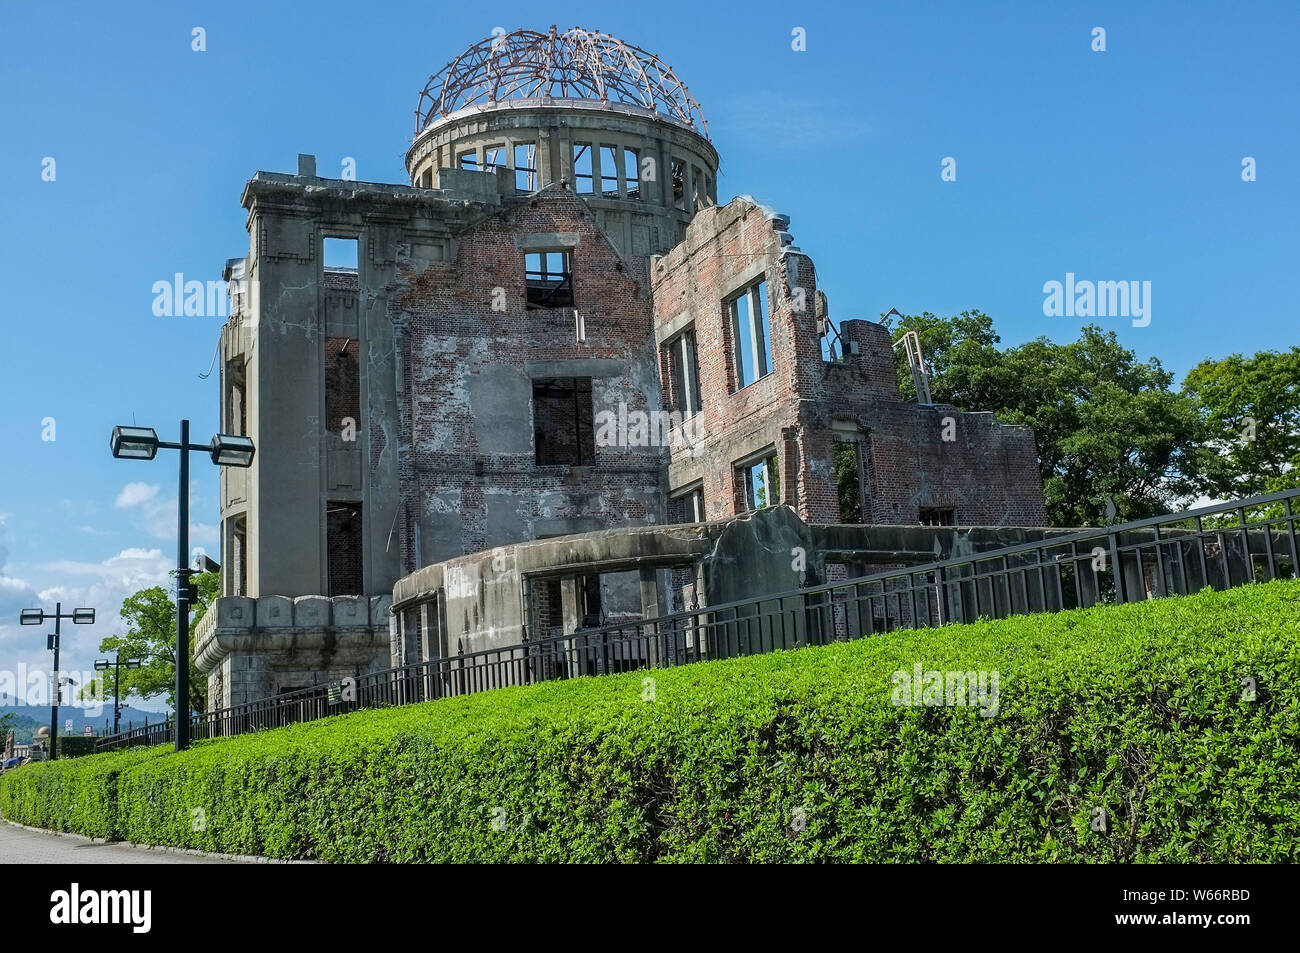 The Atomic Bomb Dome where At 8:15am on 6th August 1945, the first atomic bomb in human history was dropped on Hiroshima, Japan. Genbaku dome. Stock Photo